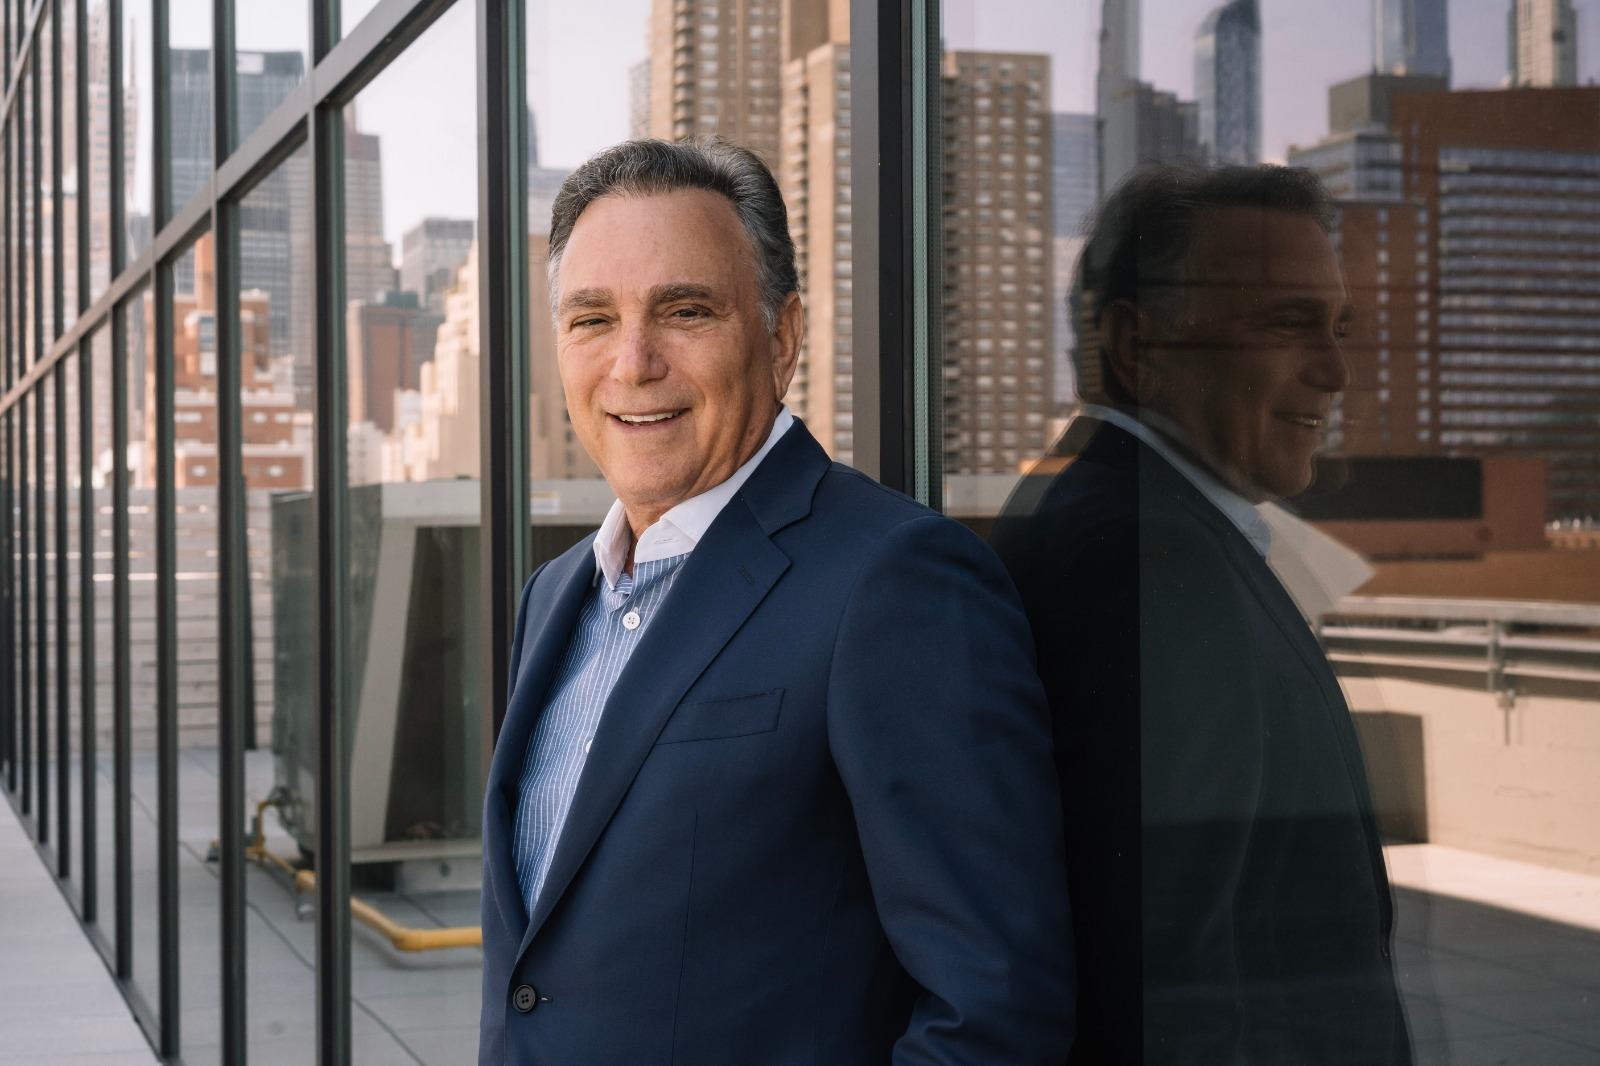 Real Estate Tycoon Transforms Career from Gasoline Pumps to a $100 Million Property Empire – Unveils the Secret to His Success